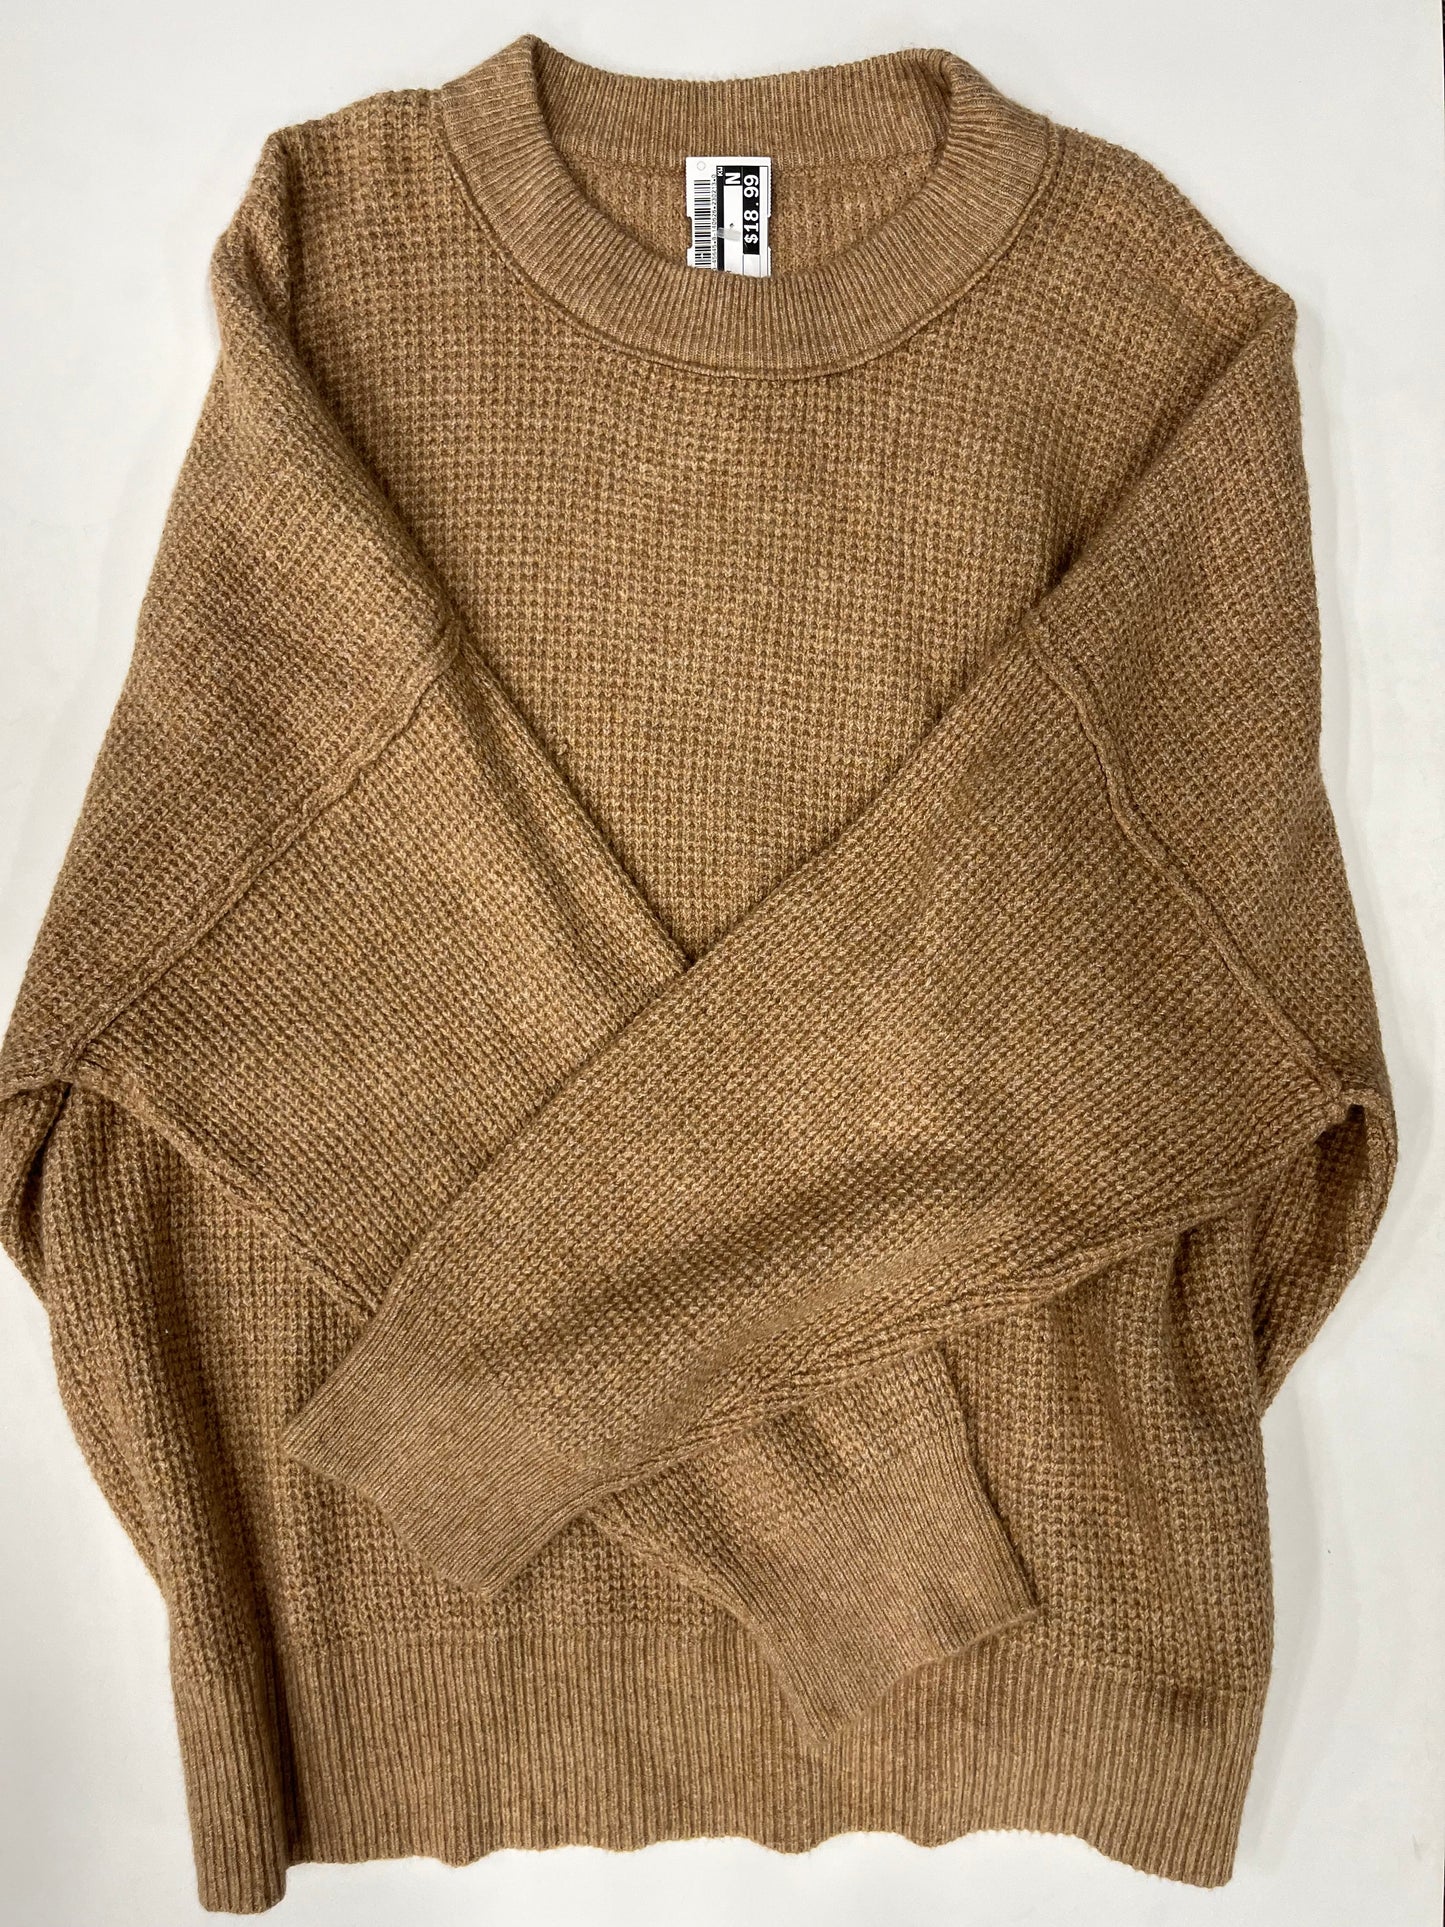 Sweater By Aerie NWT  Size: Xl